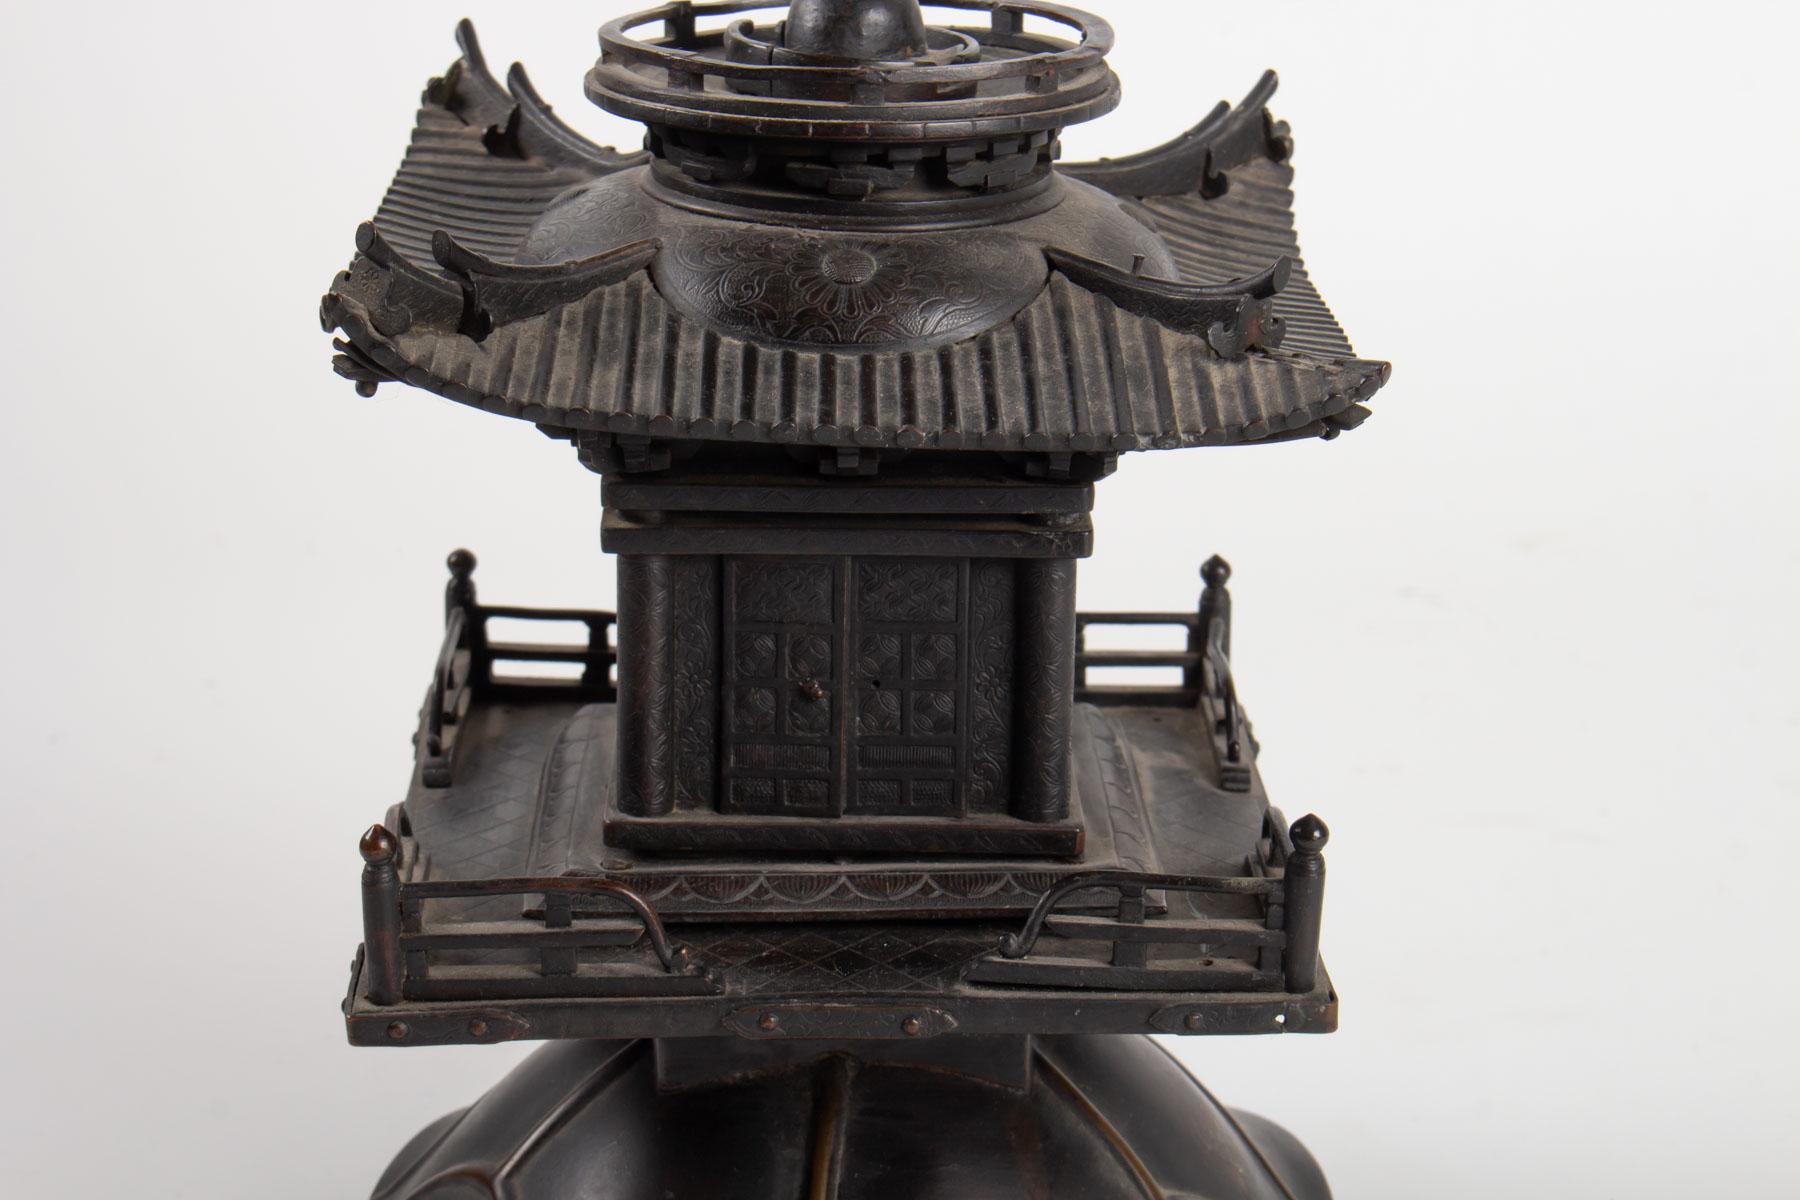 Temple, China, bronze, late 19th century, Asian decorative Art, small missing pagoda.
Measures: H 38cm, W 17cm, W 17cm.